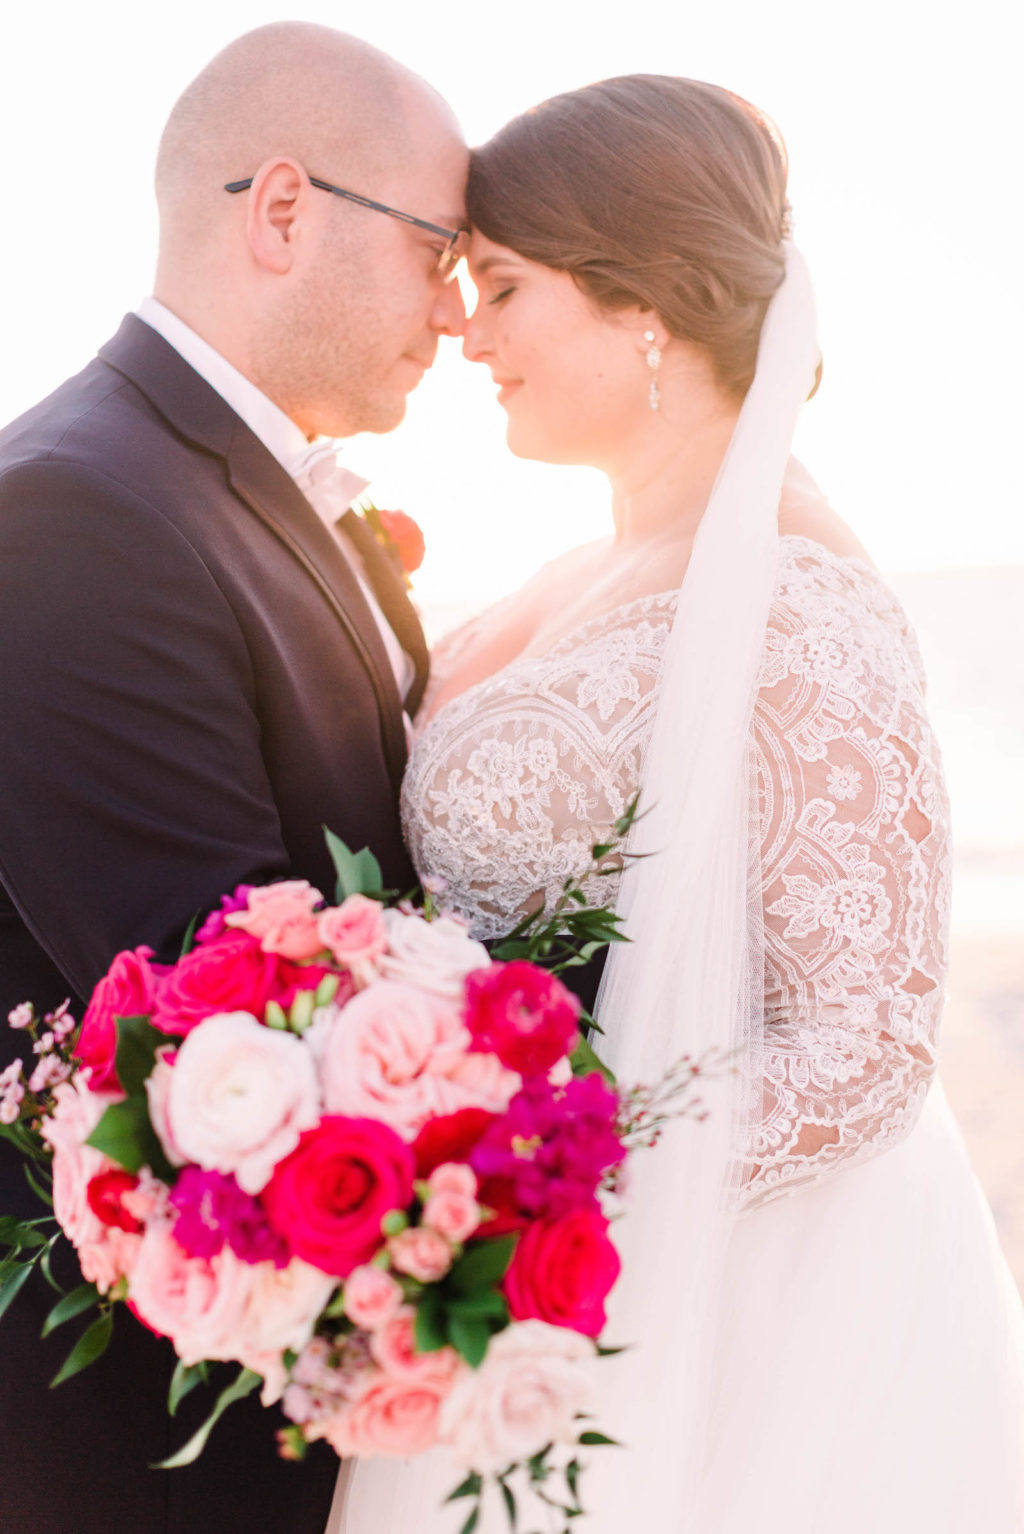 Romantic Sunset Bride and Groom Photo | Bride Wearing Lace and Illusion Long Sleeve Wedding Dress Holding Lush Vibrant Pink Floral Bouquet | Tampa Bay Wedding Florist Bruce Wayne Florals | Parties A'La Carte